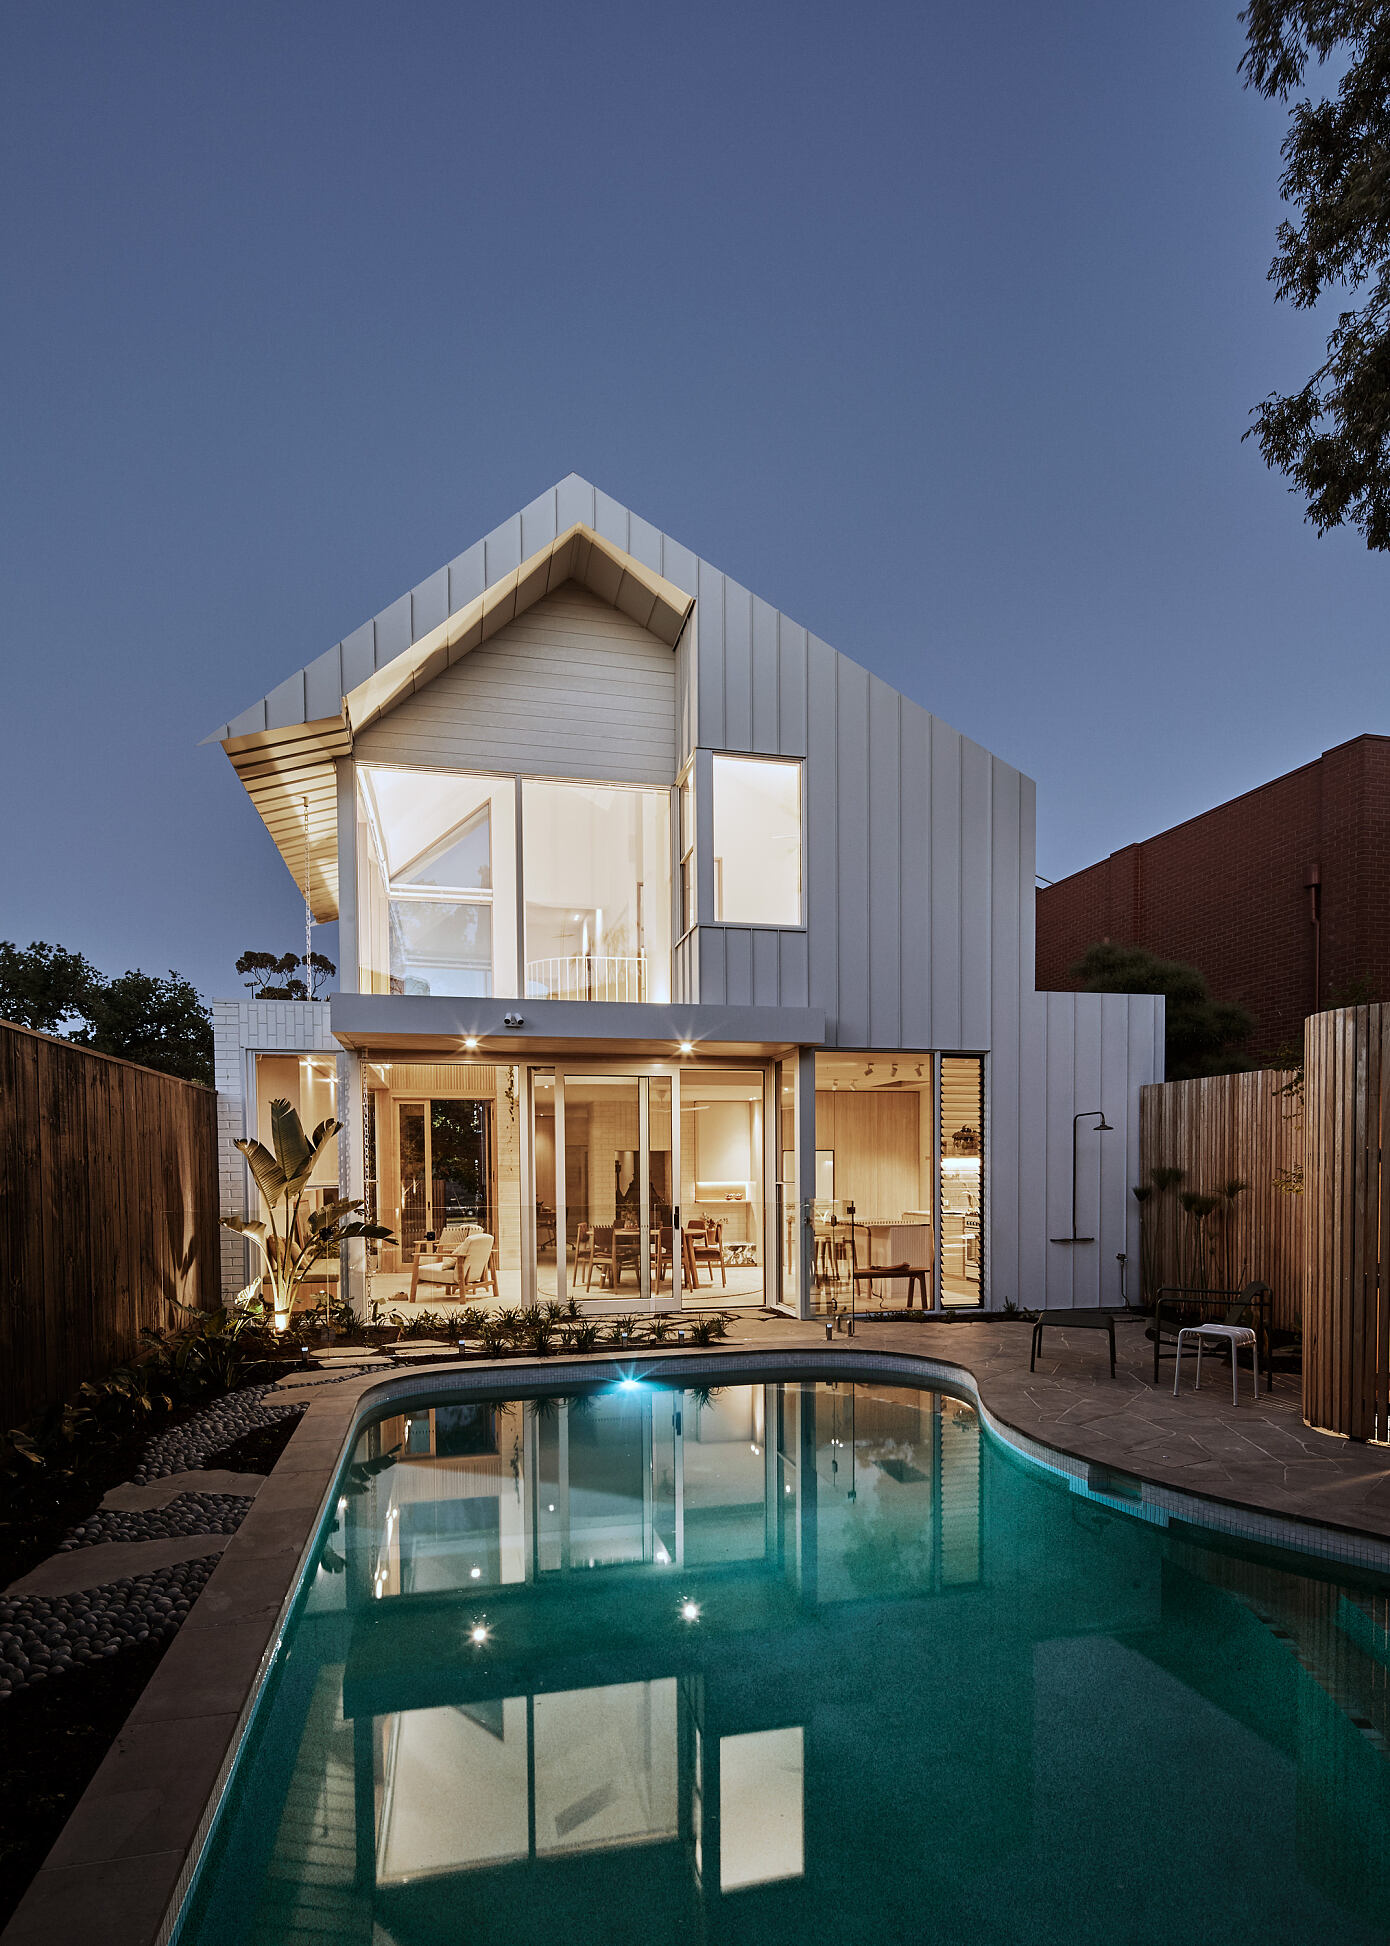 Lantern House by Timmins + Whyte Architects